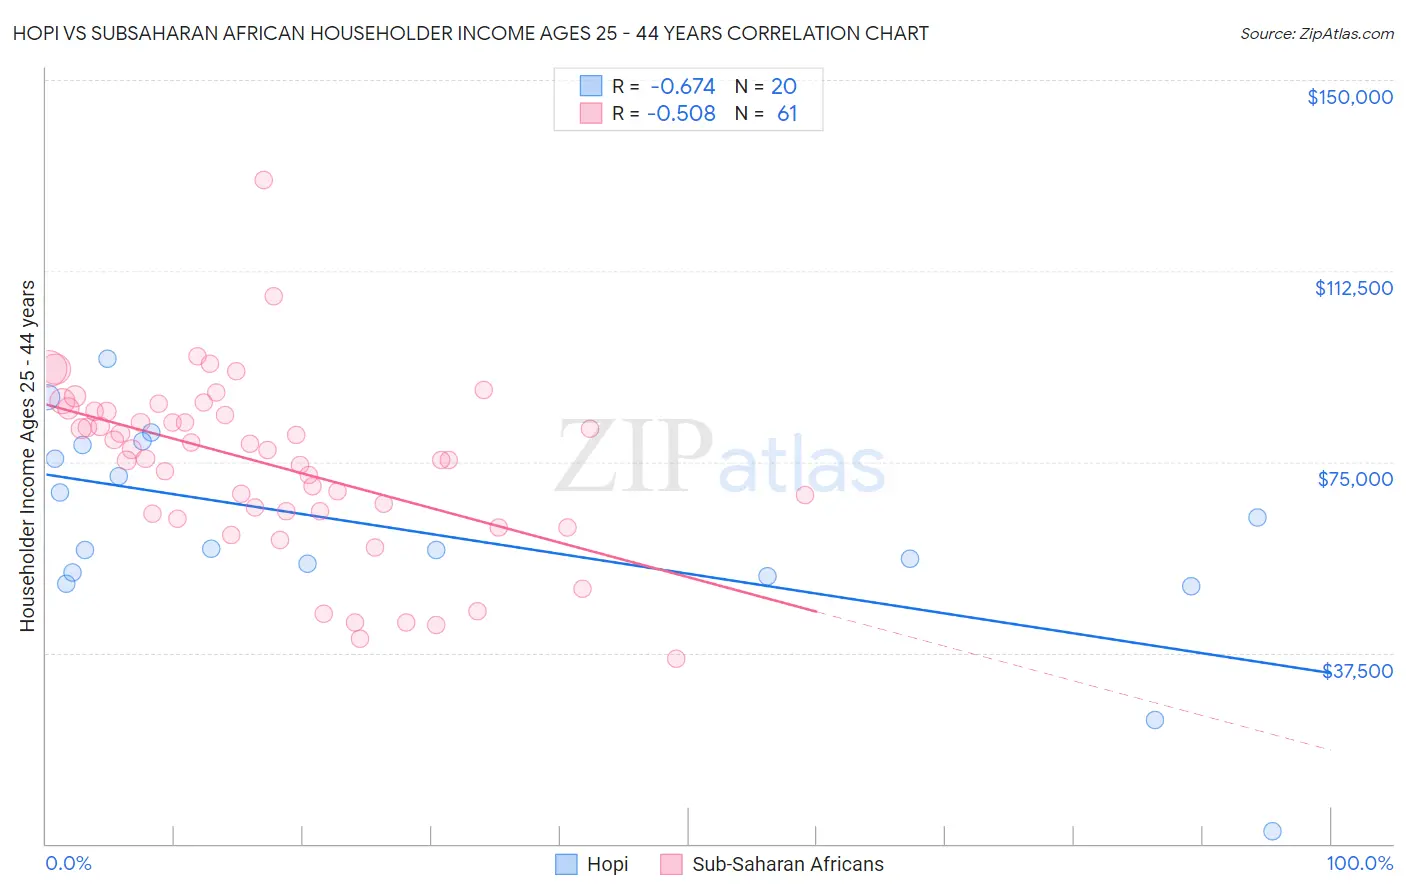 Hopi vs Subsaharan African Householder Income Ages 25 - 44 years